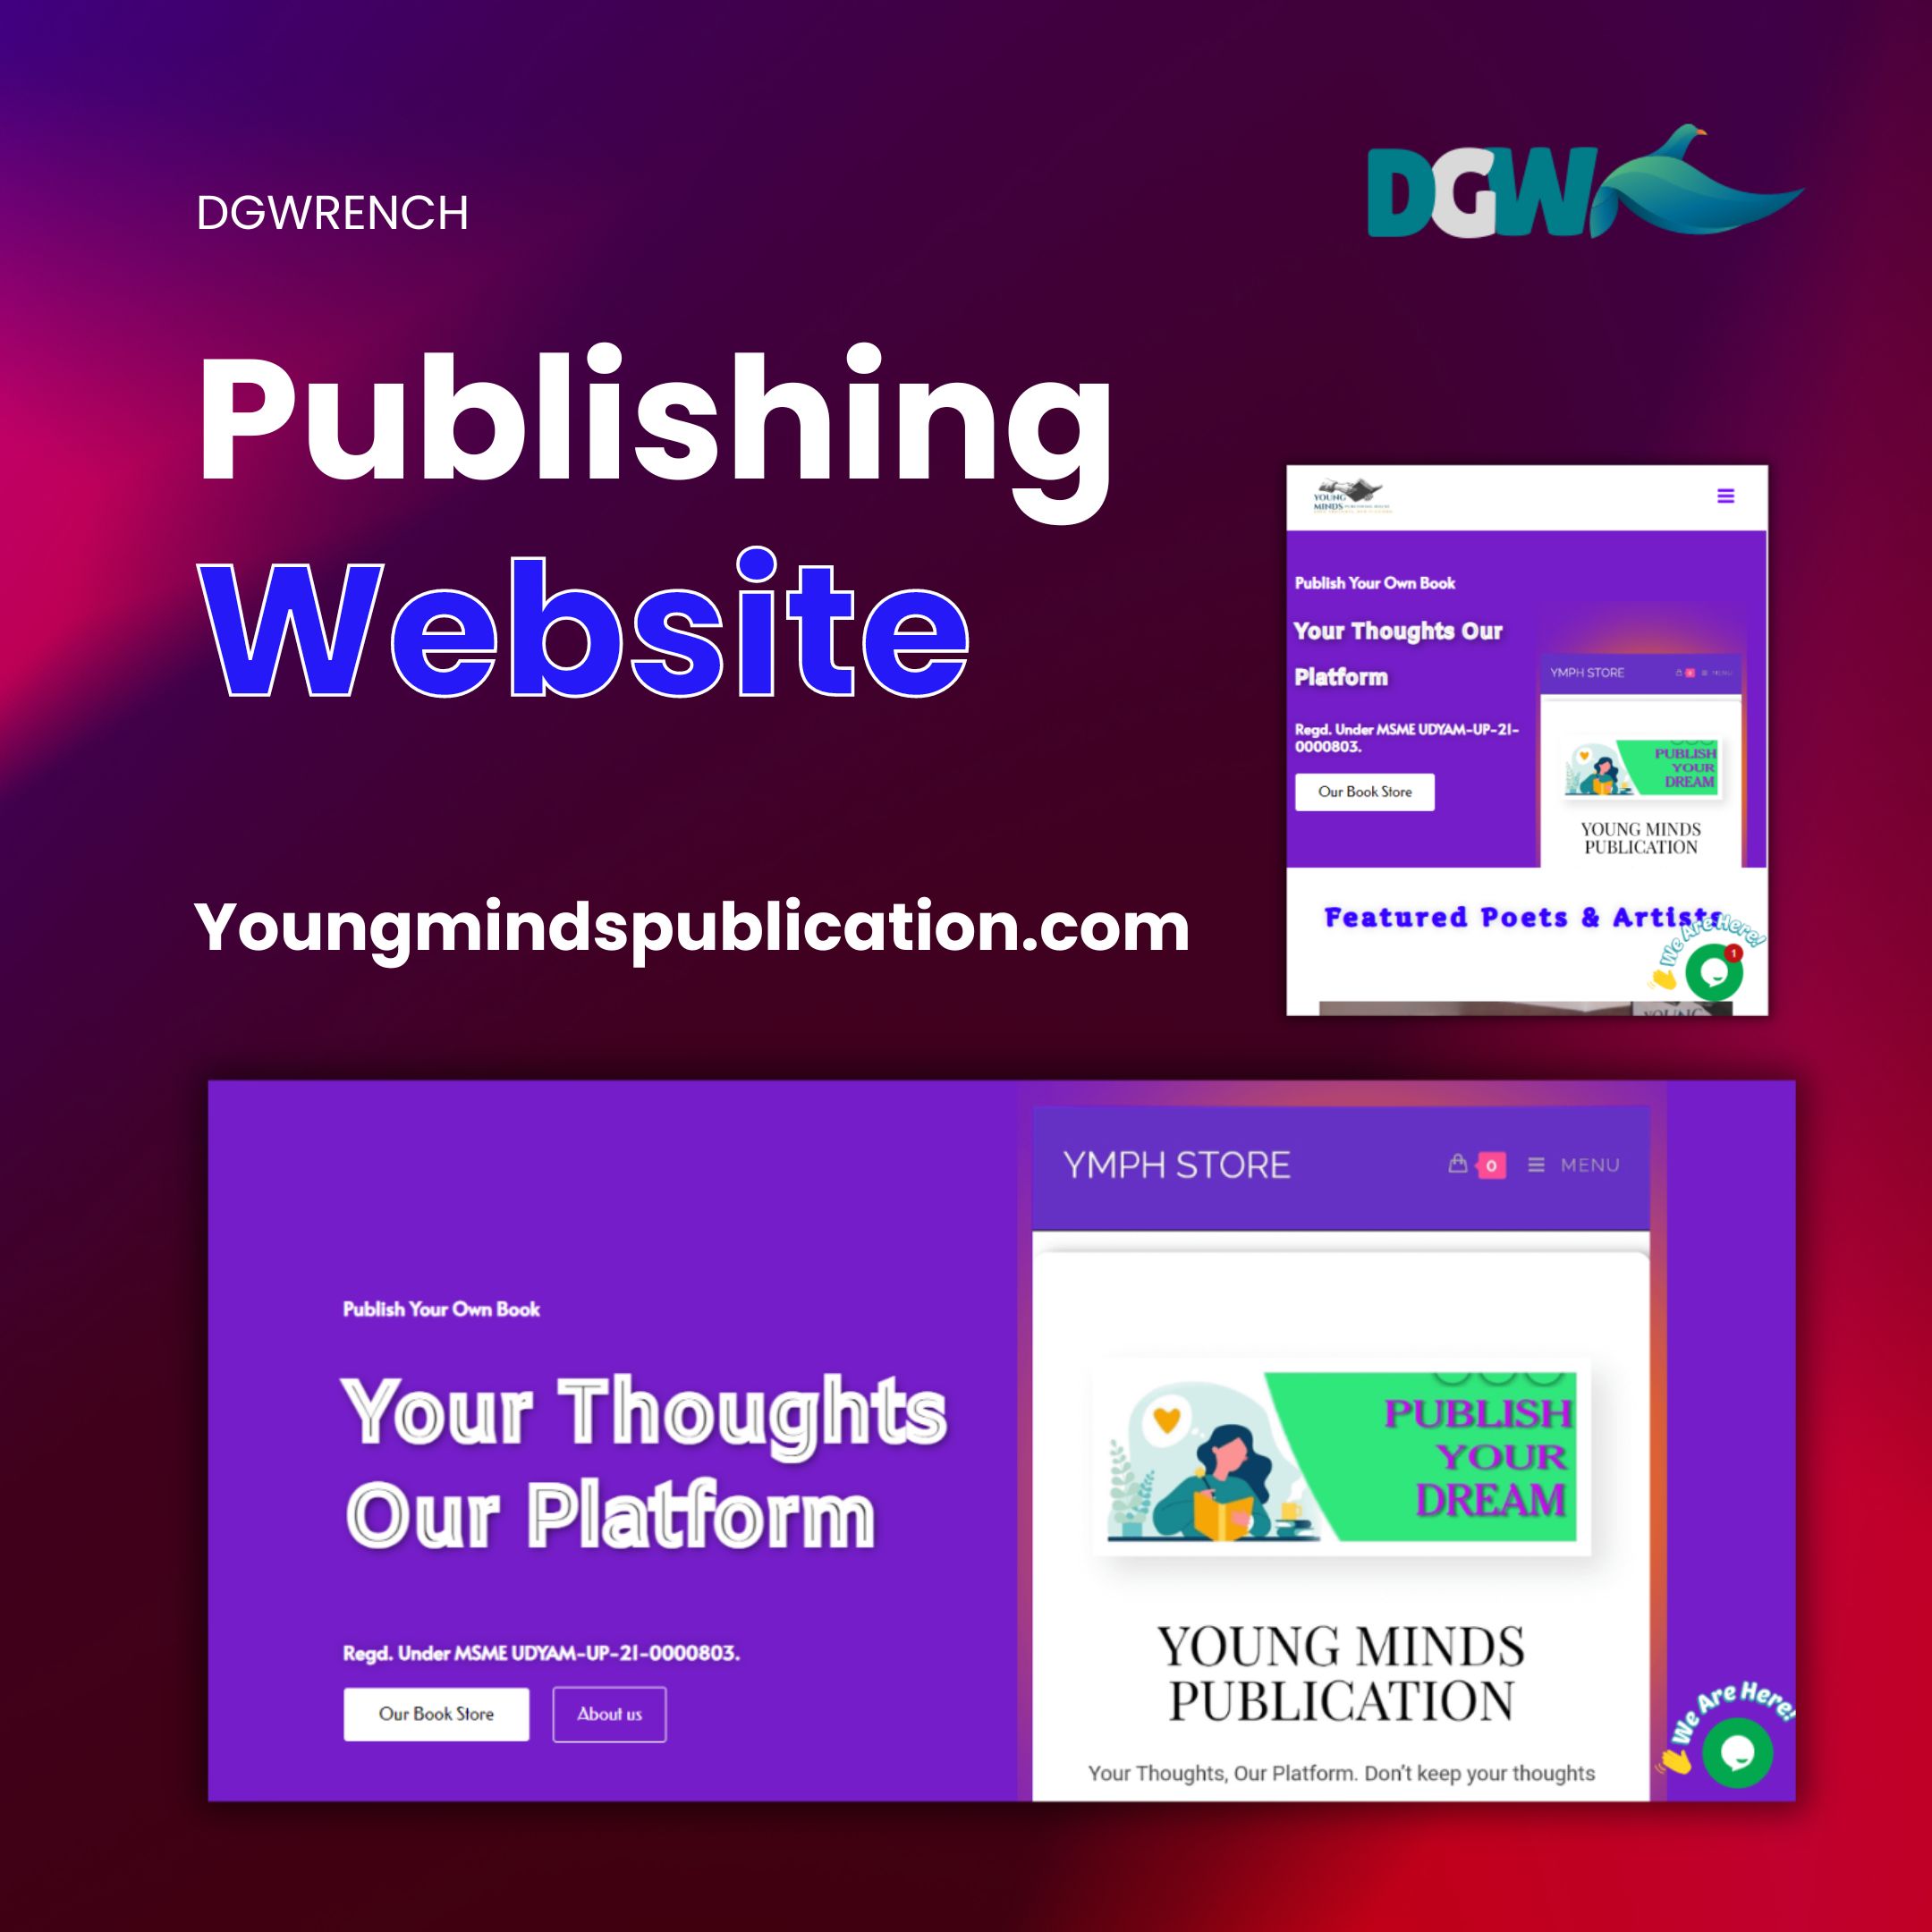 publishing website - dgwrench